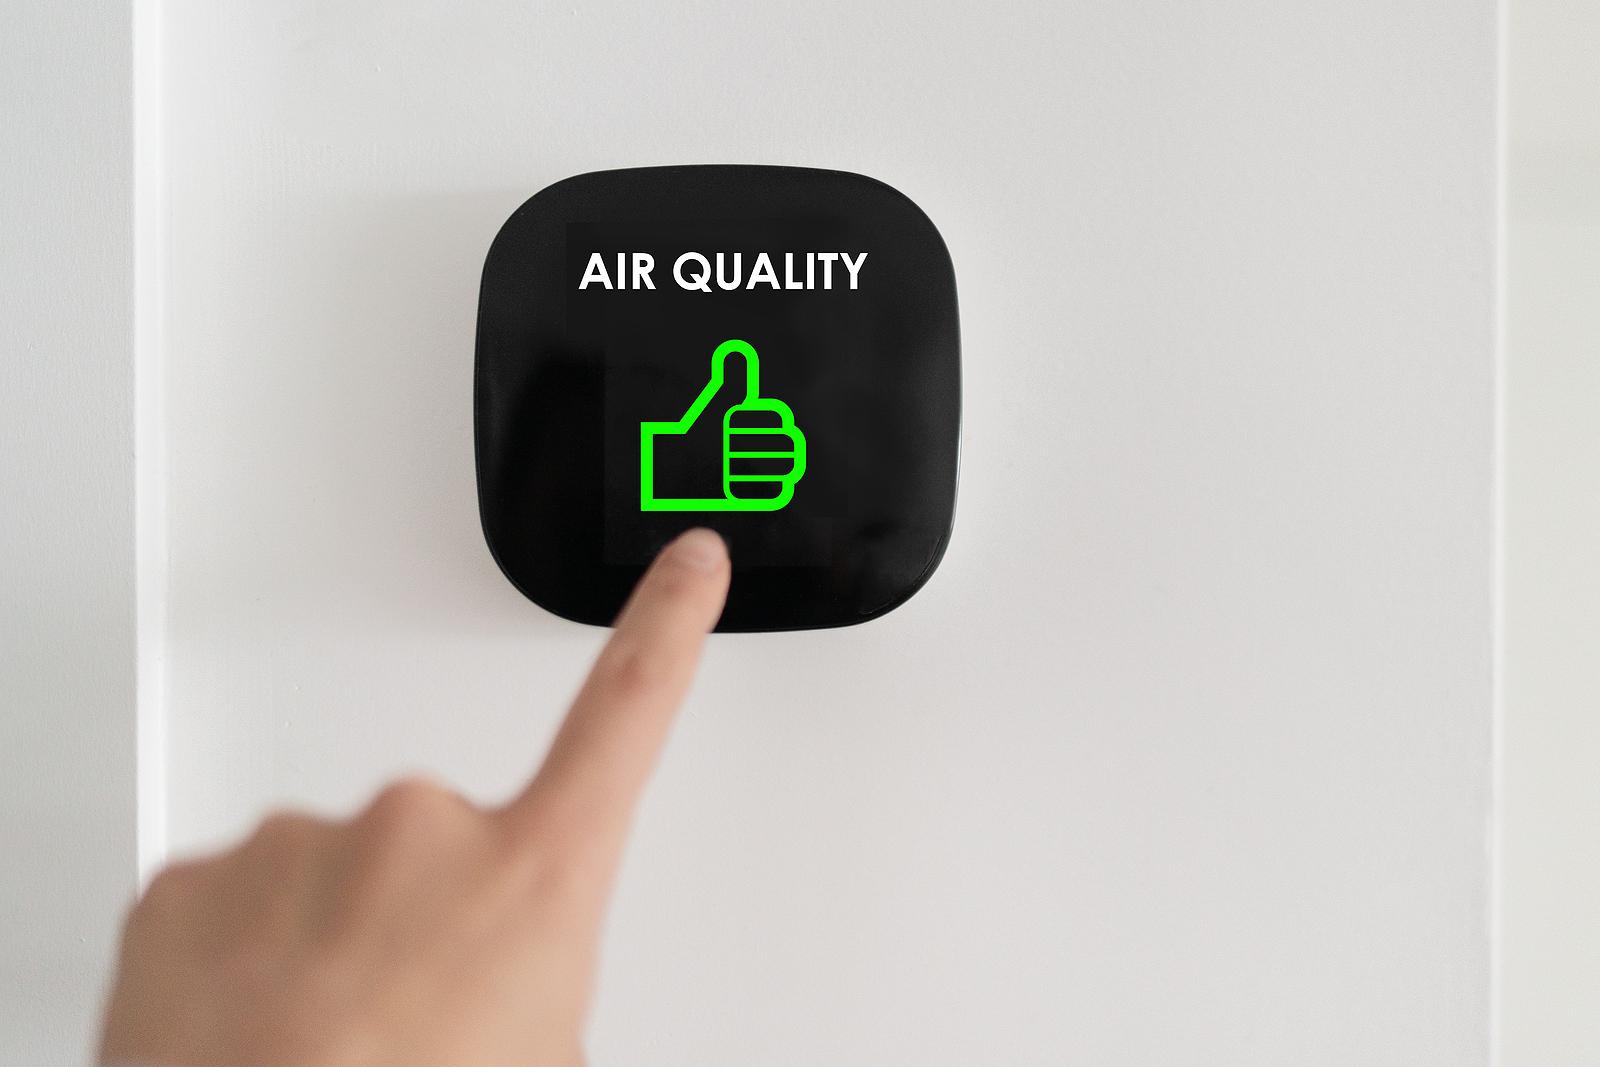 How to Improve Indoor Air Quality: 5 Important Things You Can Do